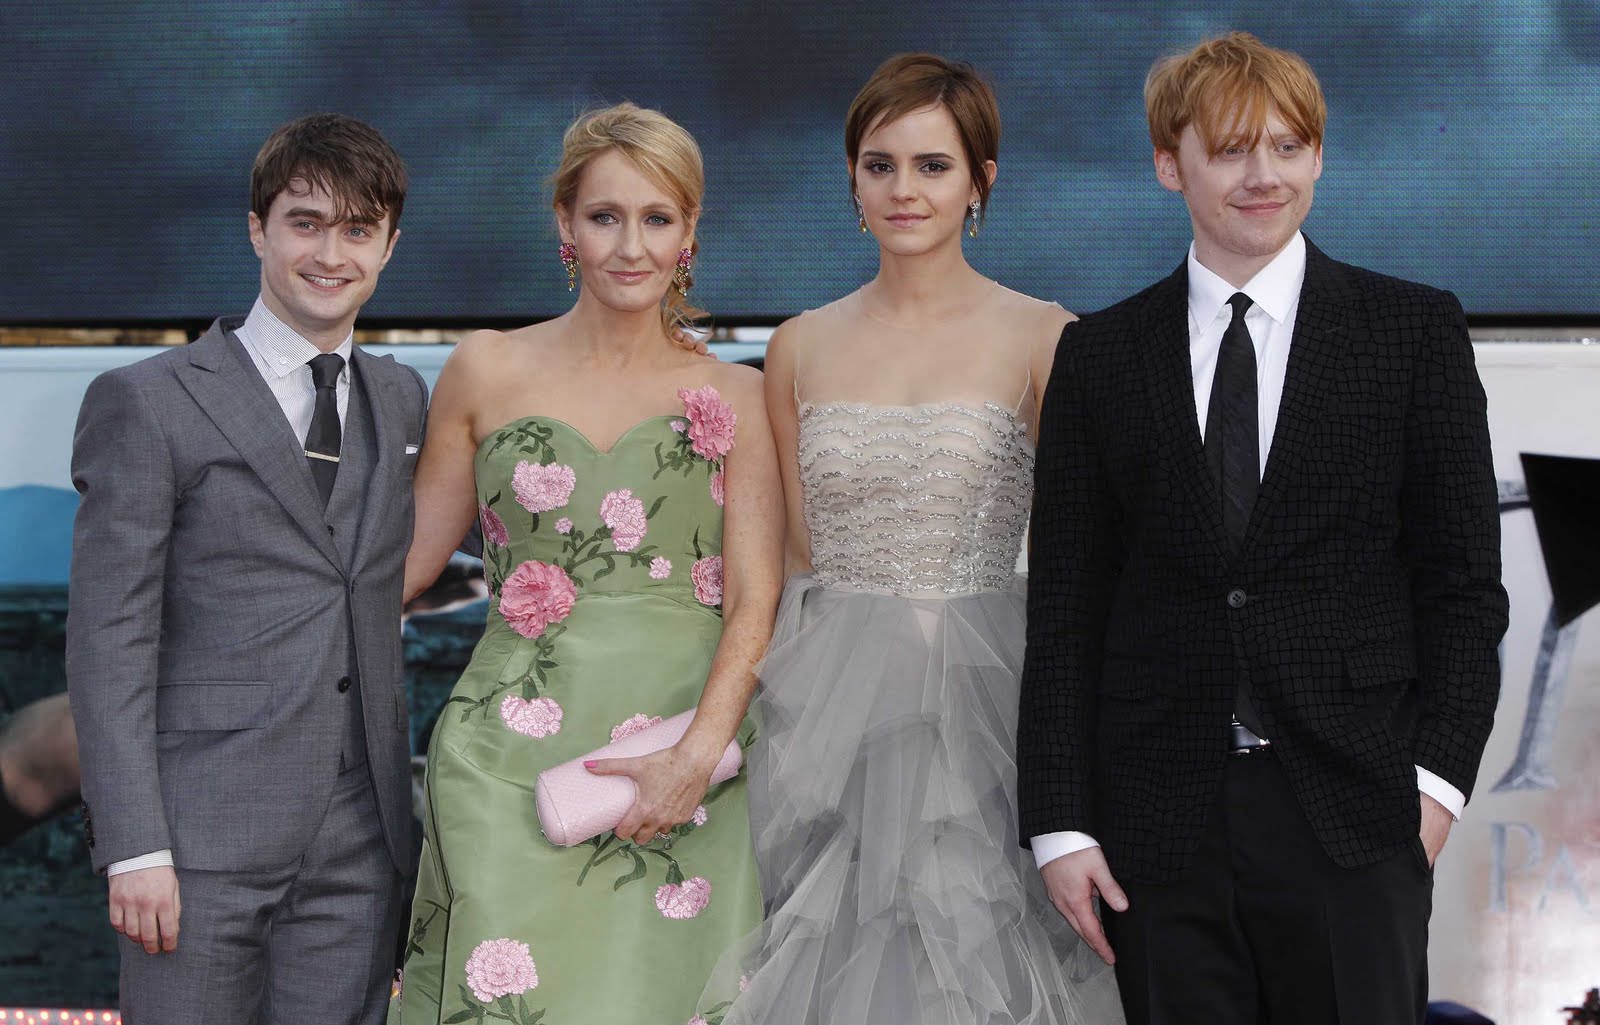 rowling-group